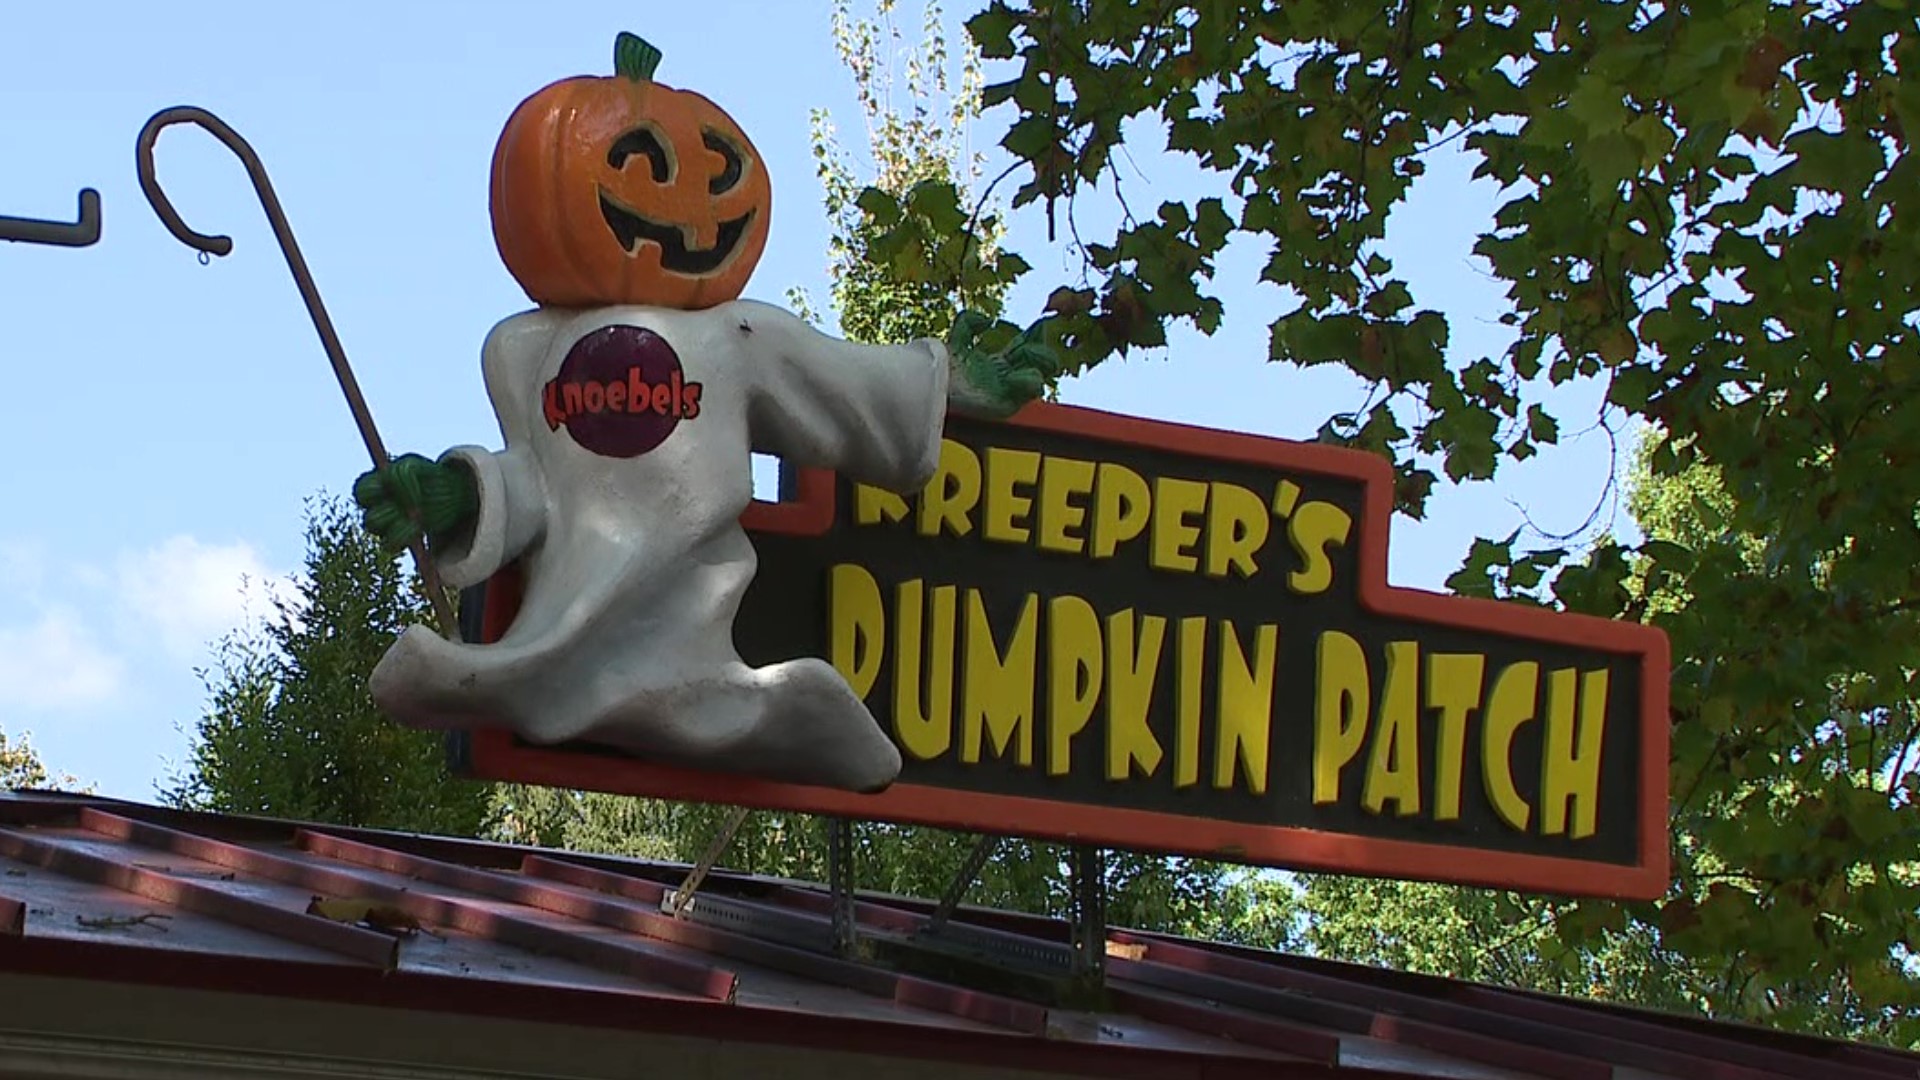 The popular amusement park in central Pennsylvania is getting into the Halloween spirit.